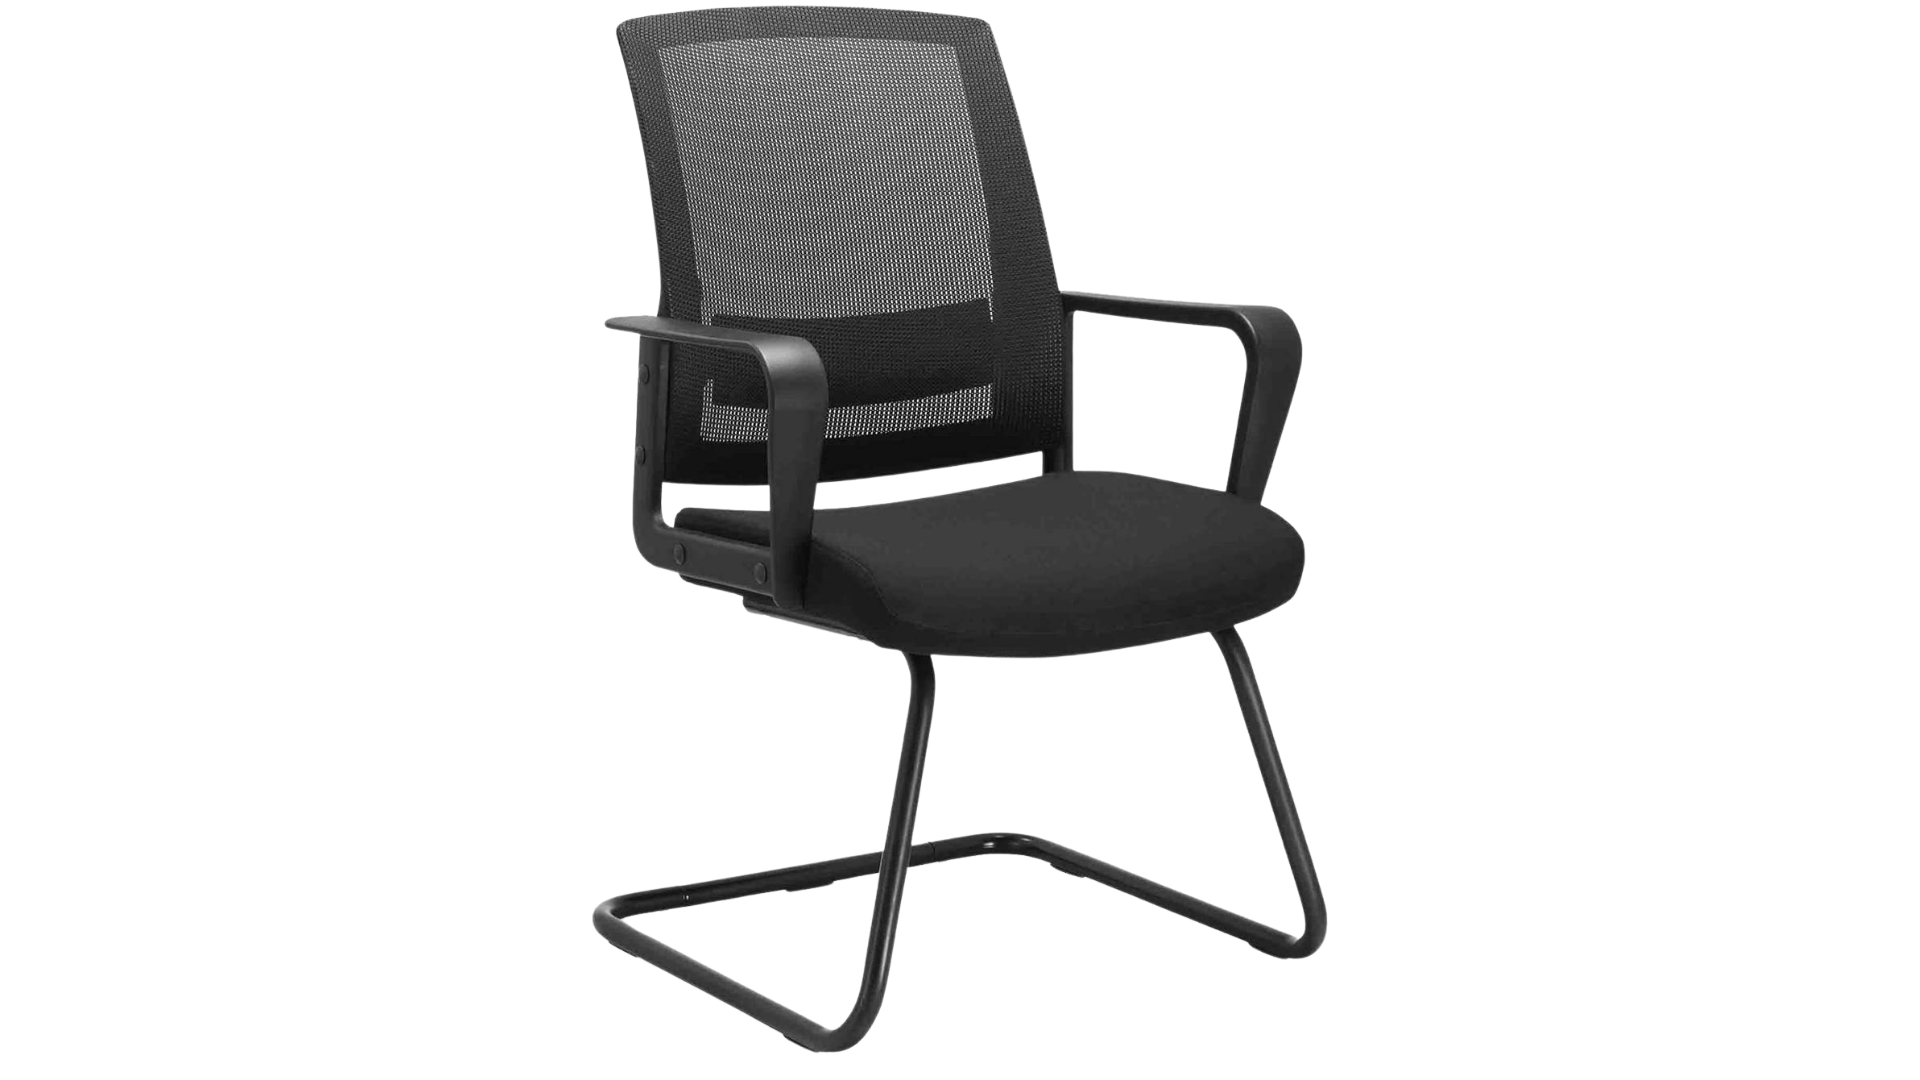 CLATINA best desk chair with no wheels